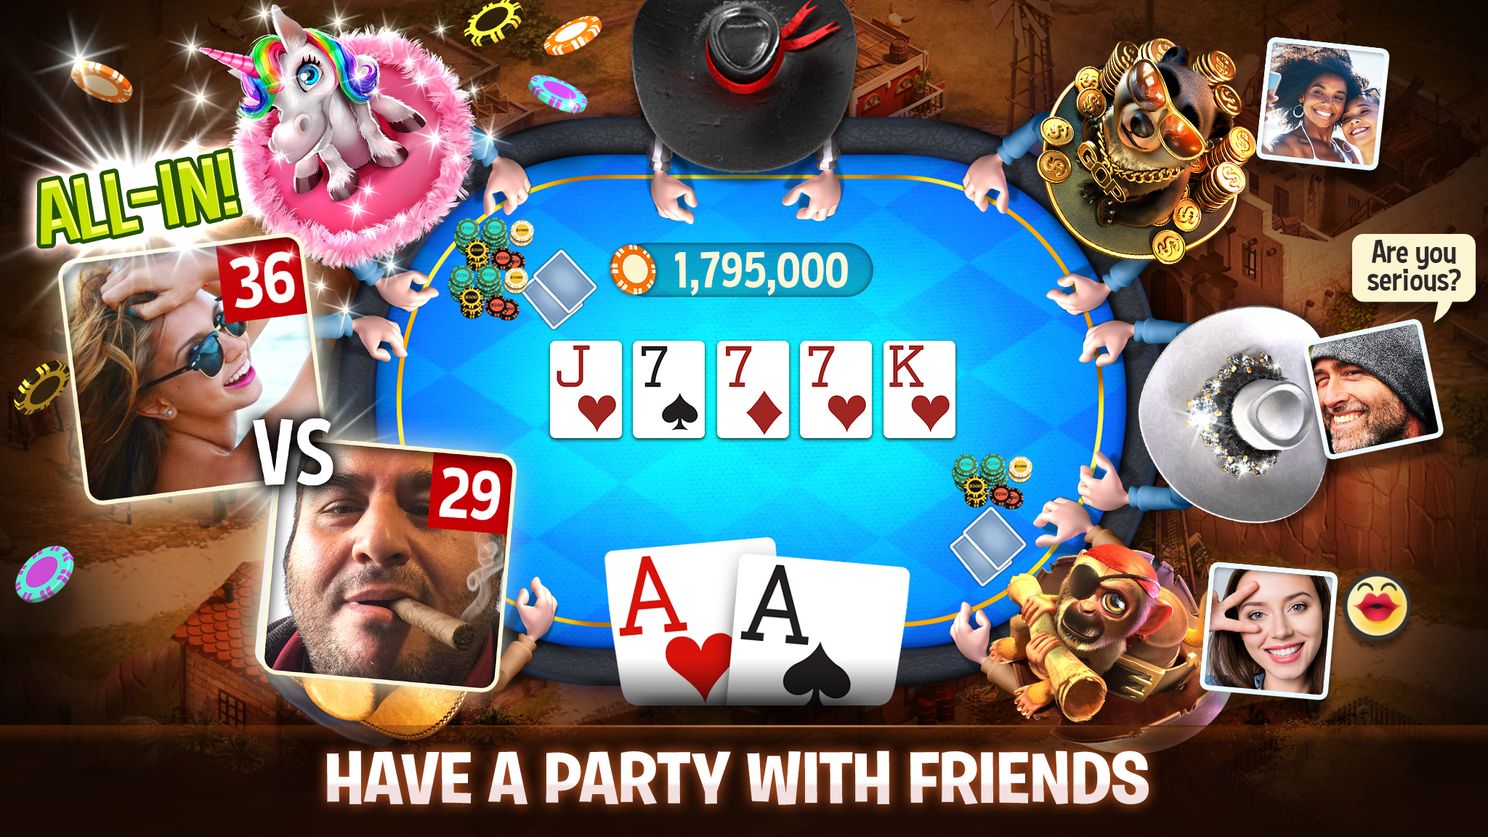 Governor of Poker: the free poker app for everyone (adv)